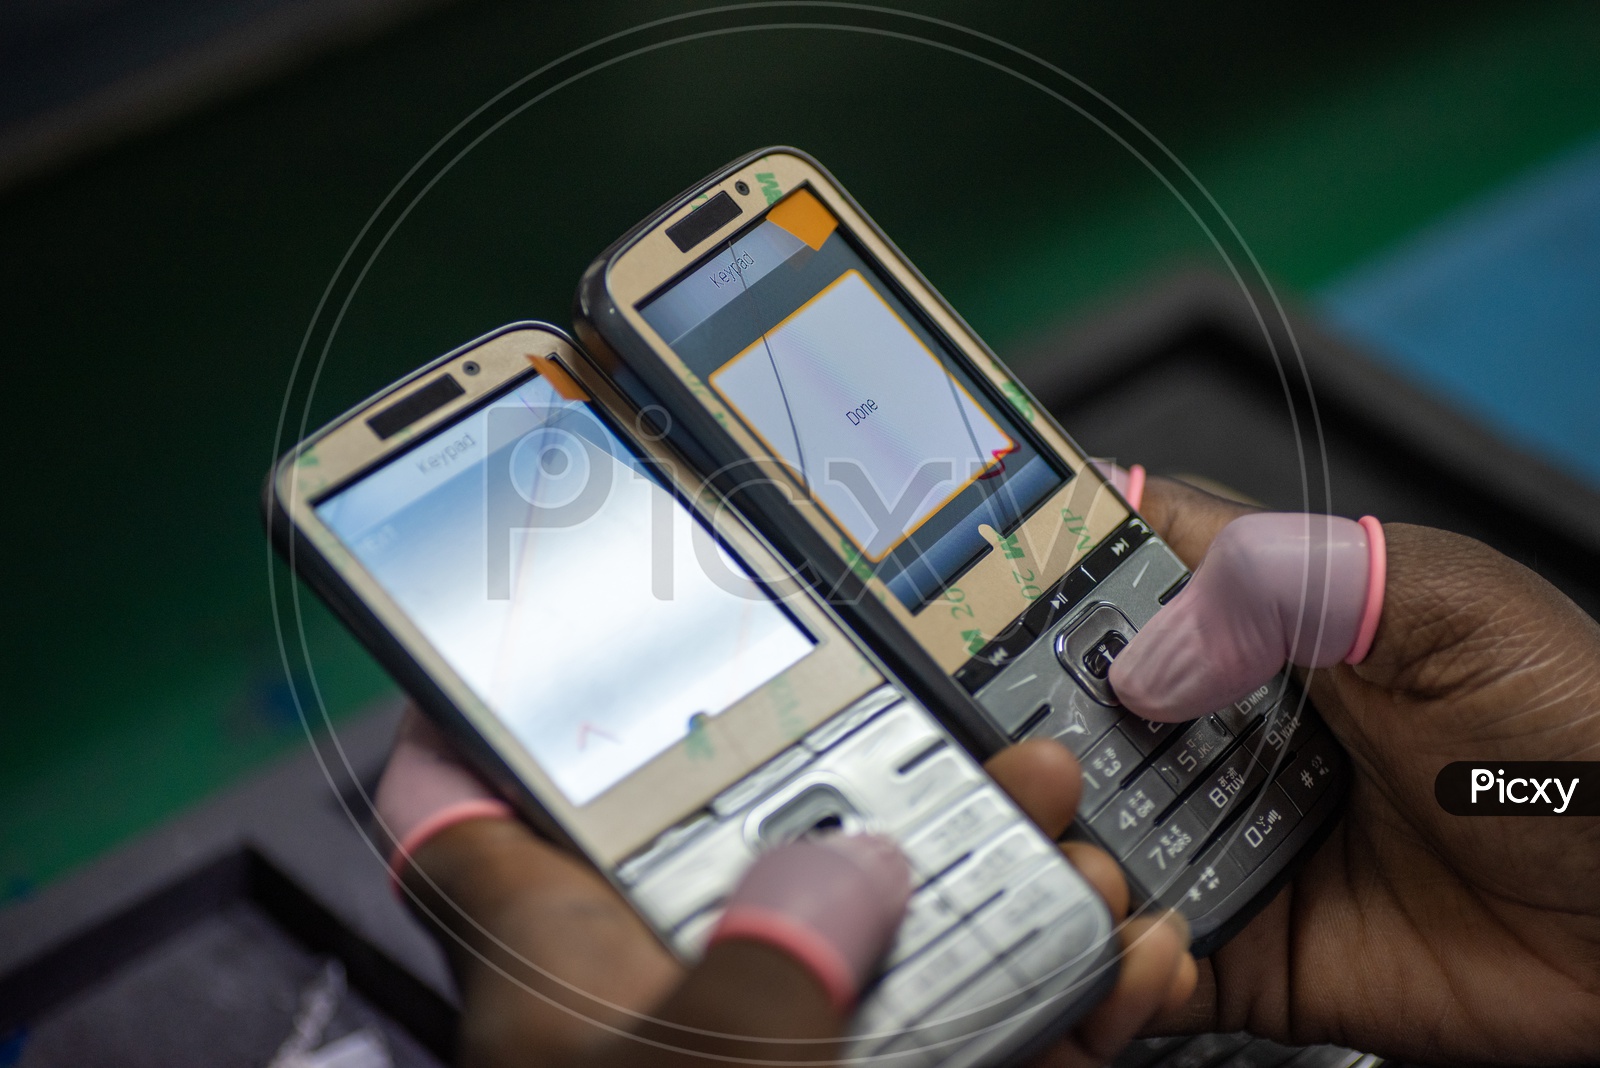 Technicians Manually Fitting the Mobile Phones in a Manufacturing Unit Hands Closeup Shots